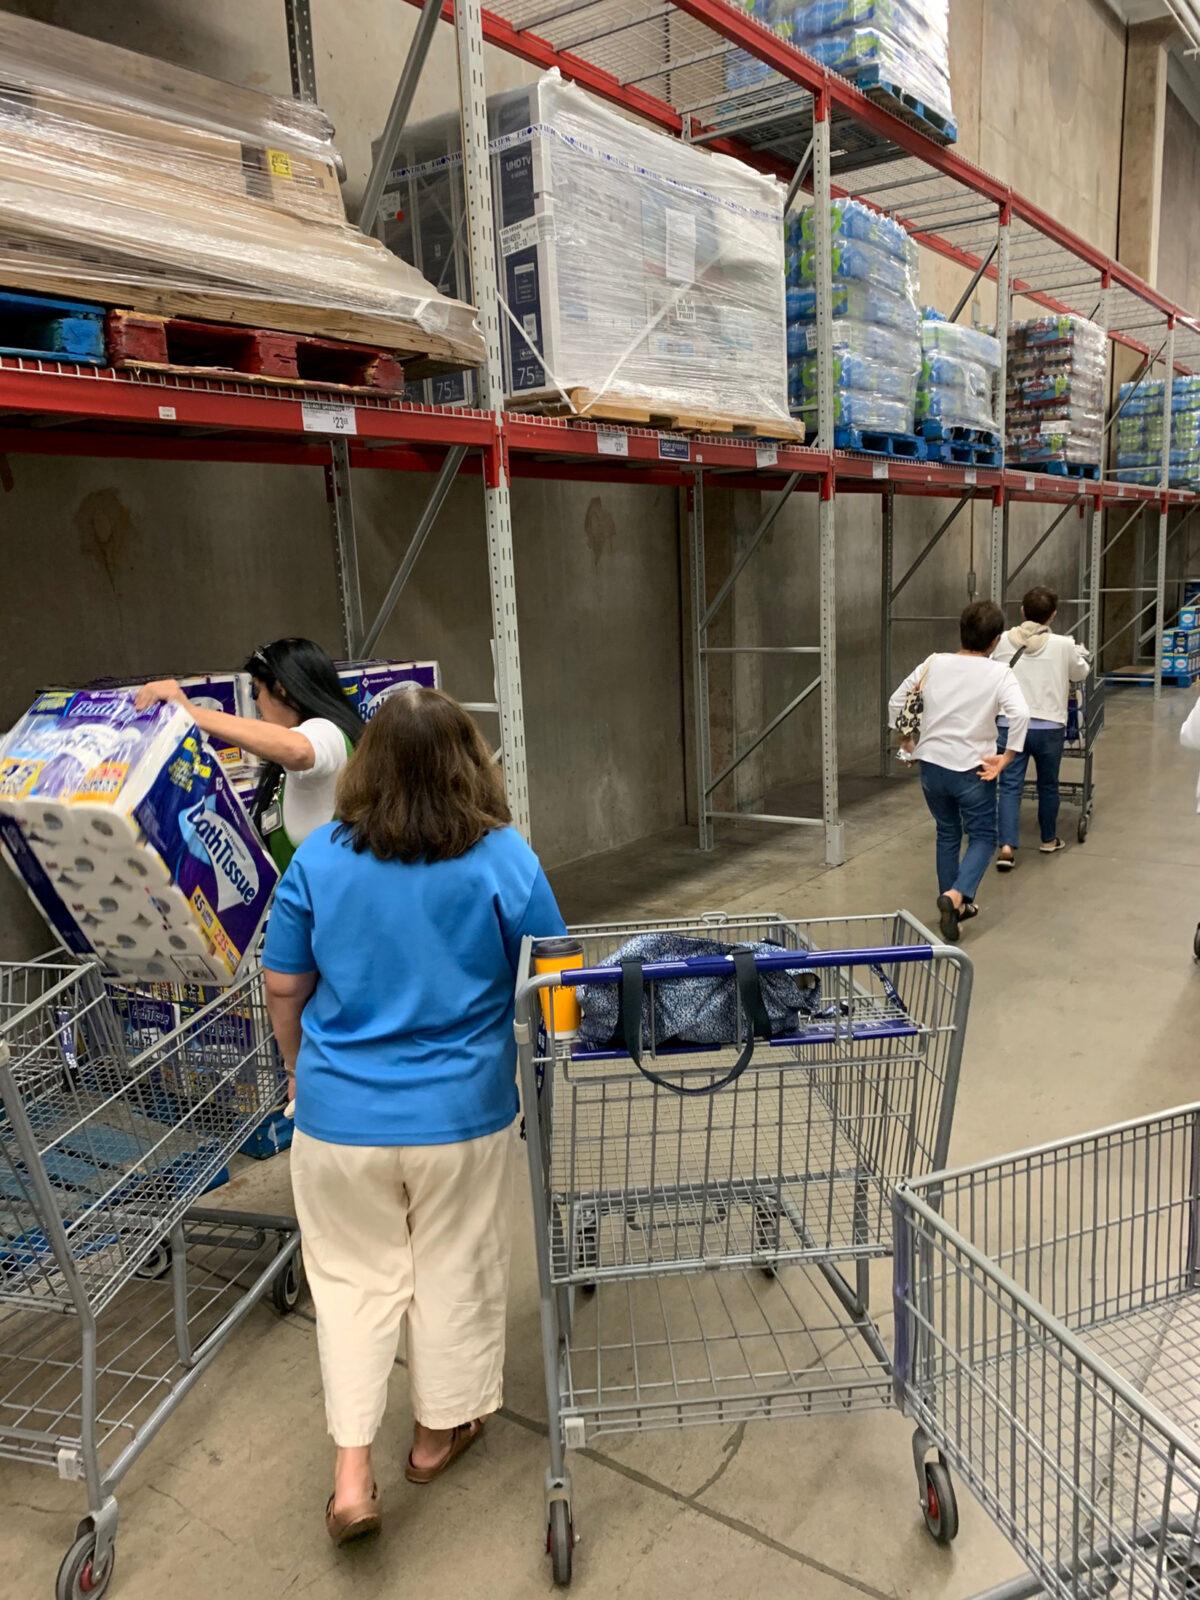 Shoppers at a Costco store buy toilet paper after the Hawaii Department of Health advised residents they should stock up on supplies for the potential risks of novel CCP virus in Honolulu, Hawaii, on Feb. 28, 2020. (Courtesy of Duane Tanouye/Reuters)